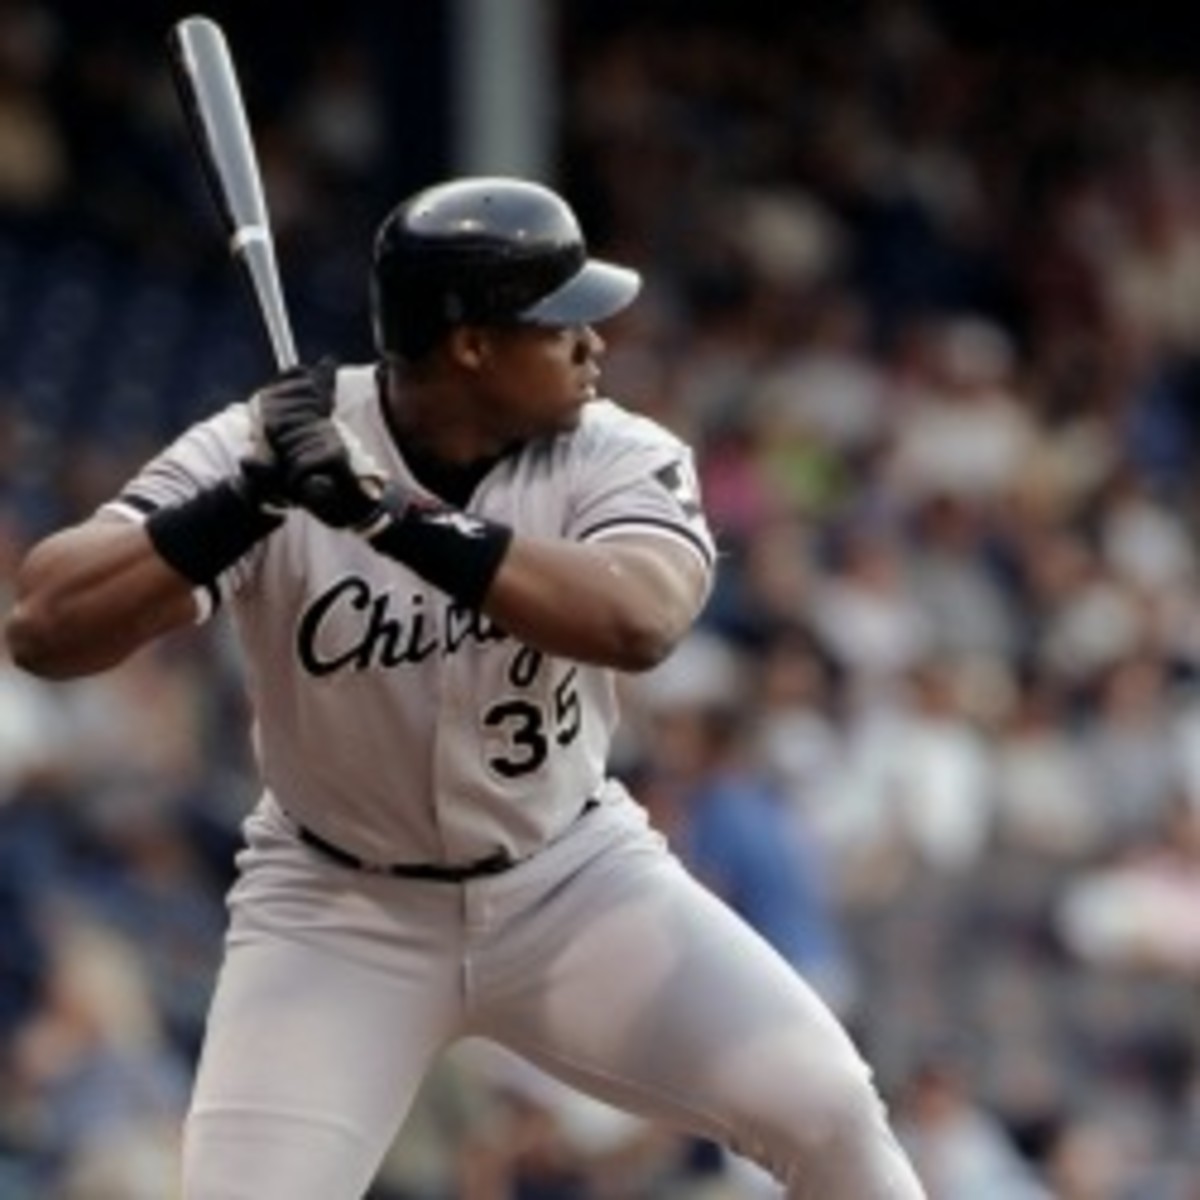 Frank Thomas is confident that he will be elected into the Hall of Fame next year. (Elsa/Getty Images)